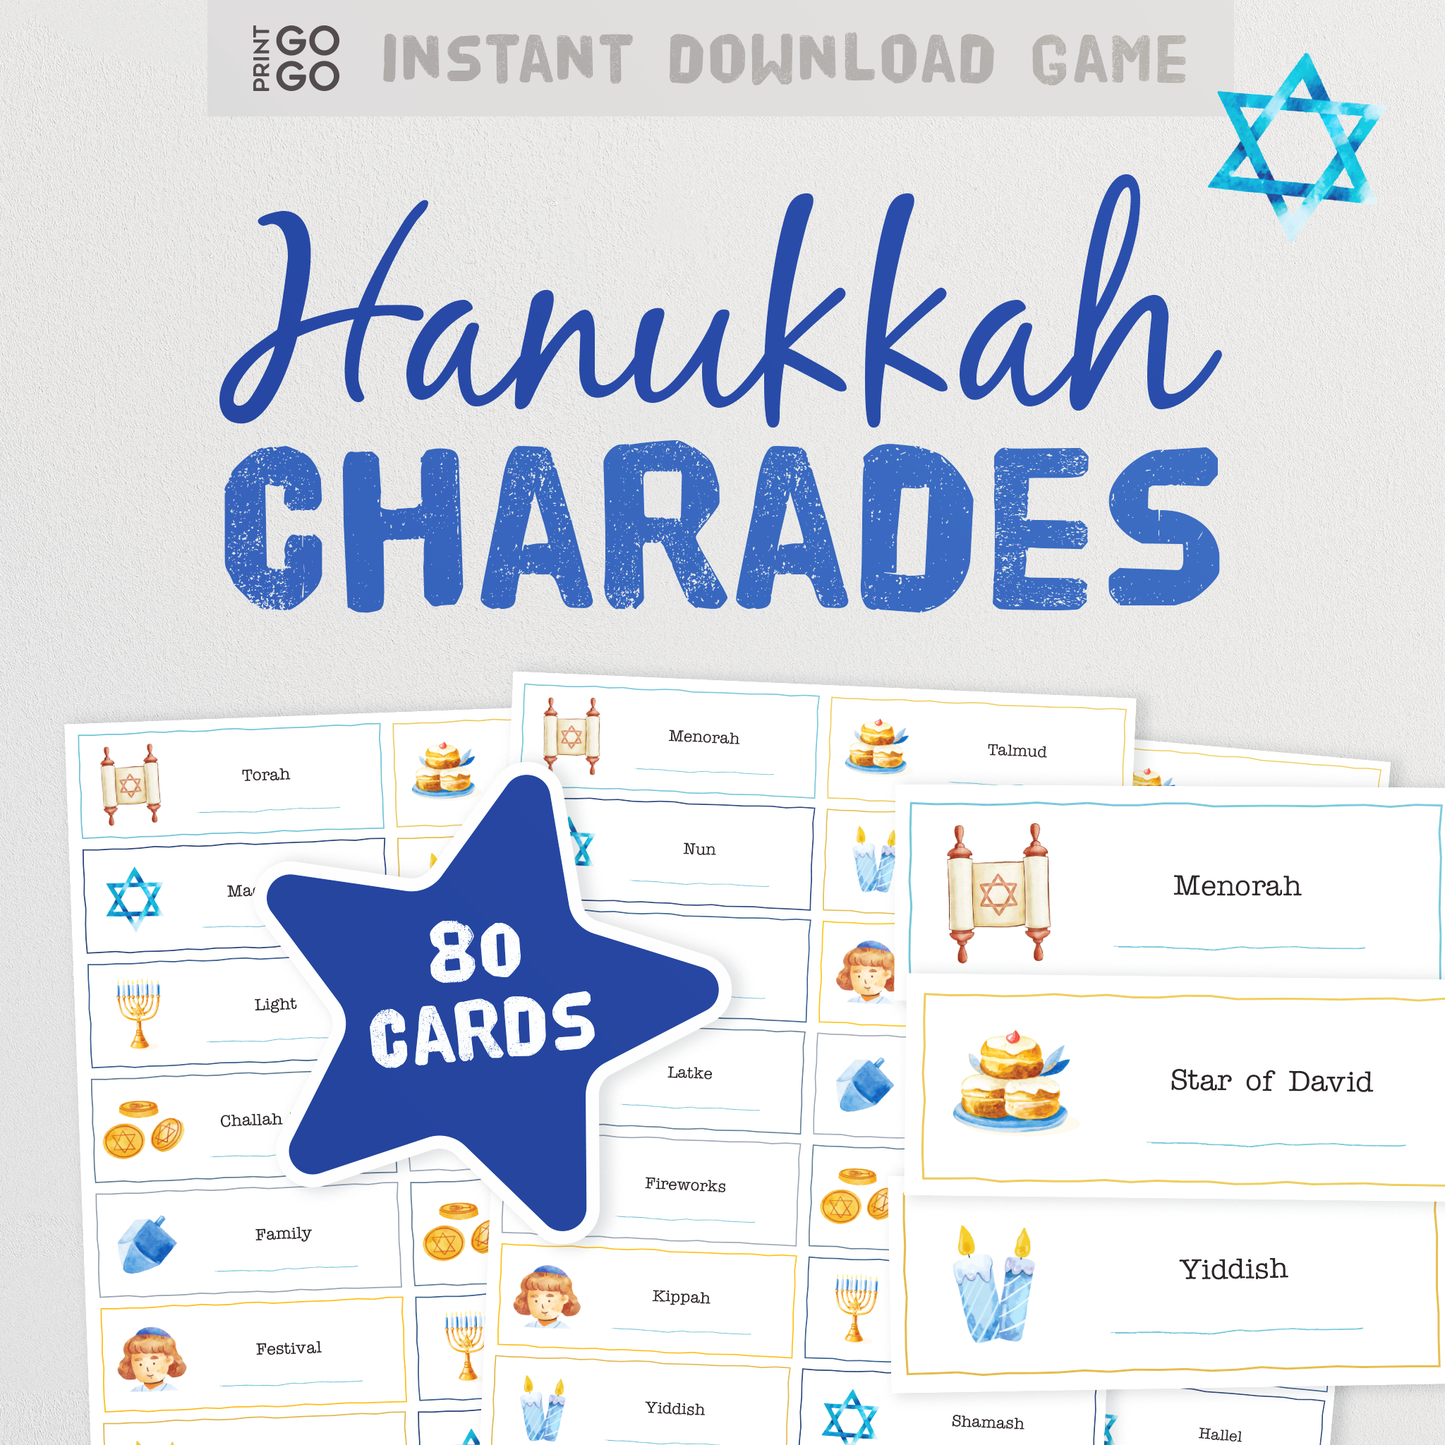 Hanukkah Charades - Celebrate the Festival of Light with a Family Party Game of Acting Out and Guessing Phrases | Jewish Team Game